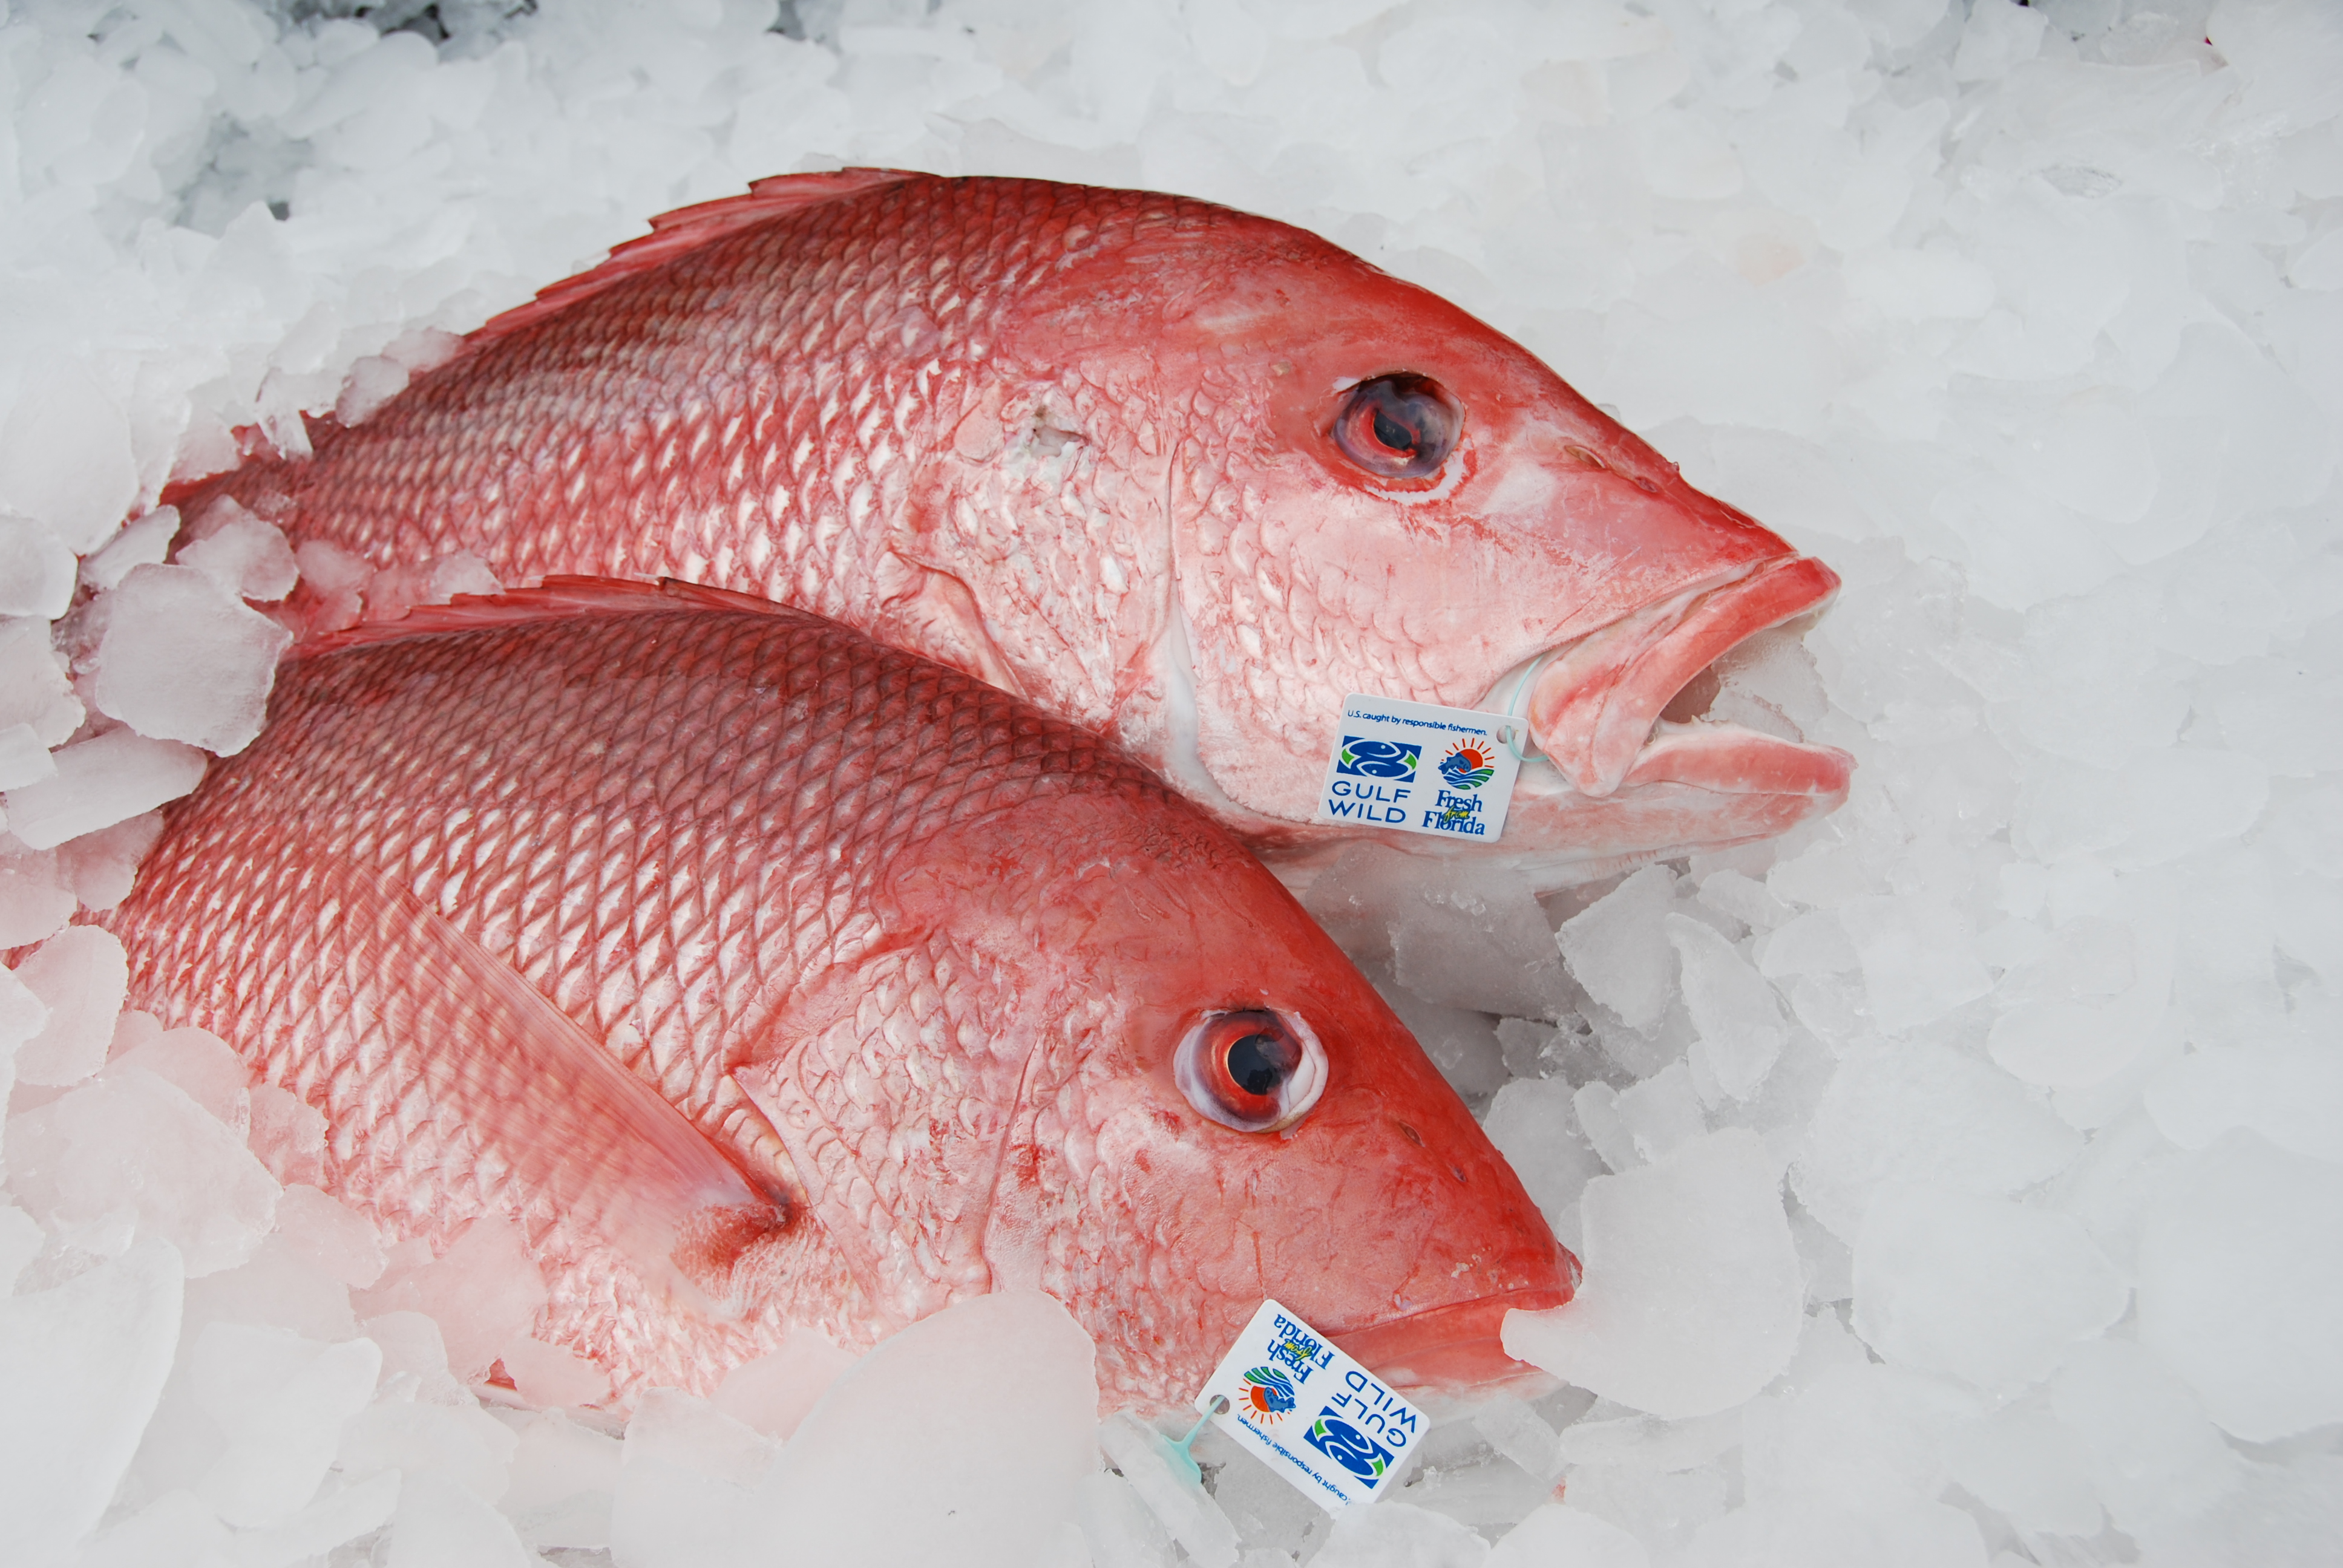 We Can All Agree Healthy Red Snapper Populations in the Gulf - Marine Conservation Network